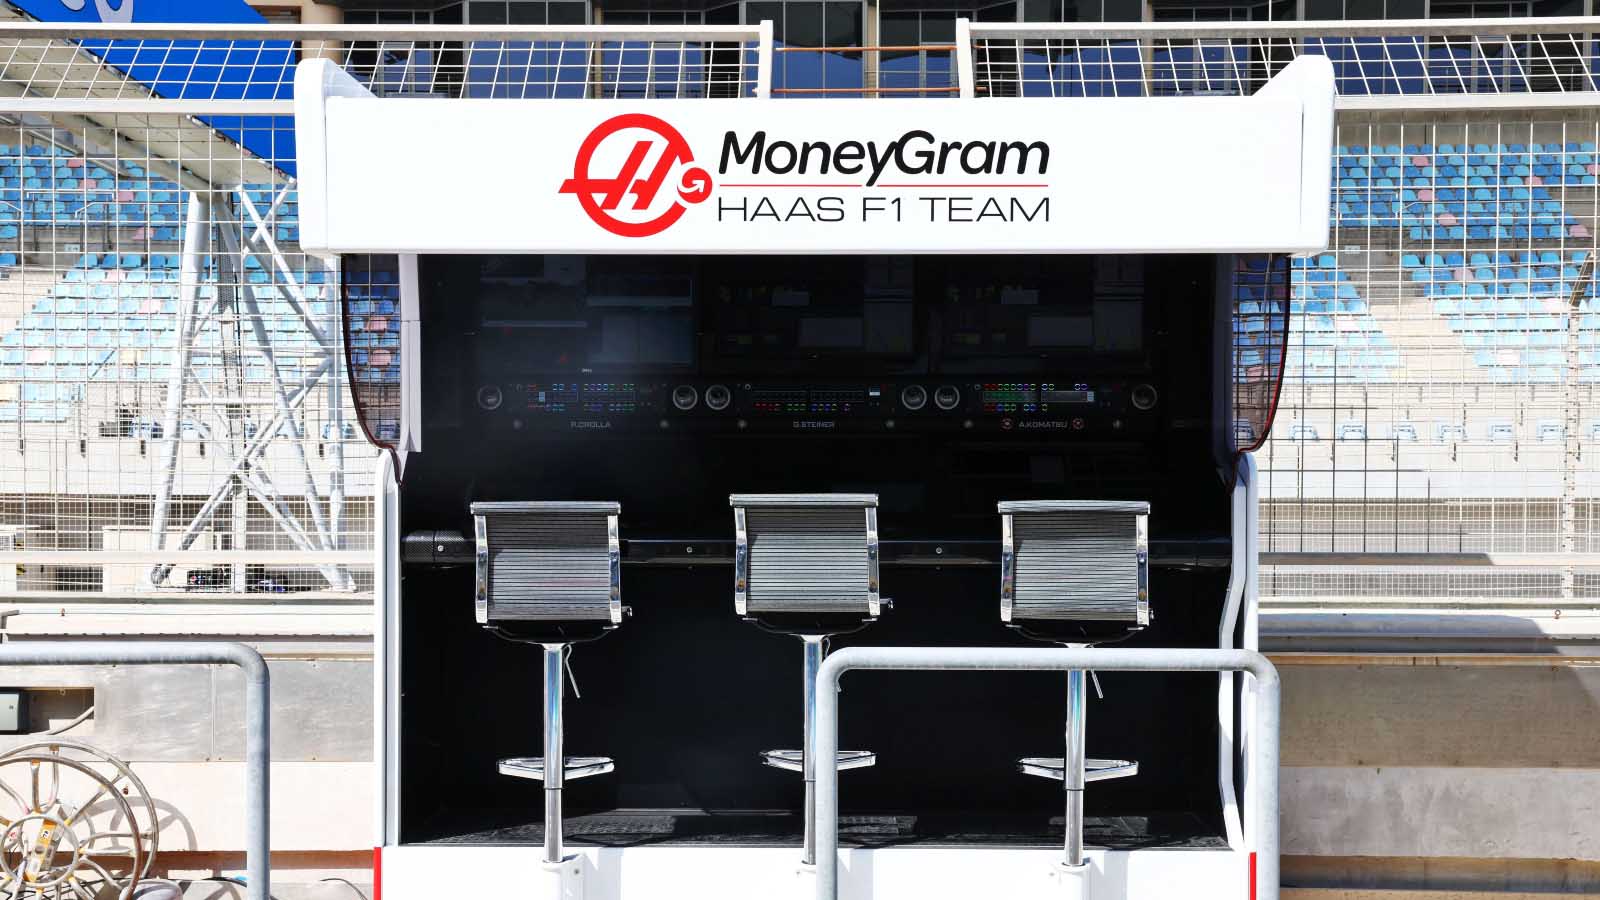 The new Haas pit wall. Bahrain February 2023.